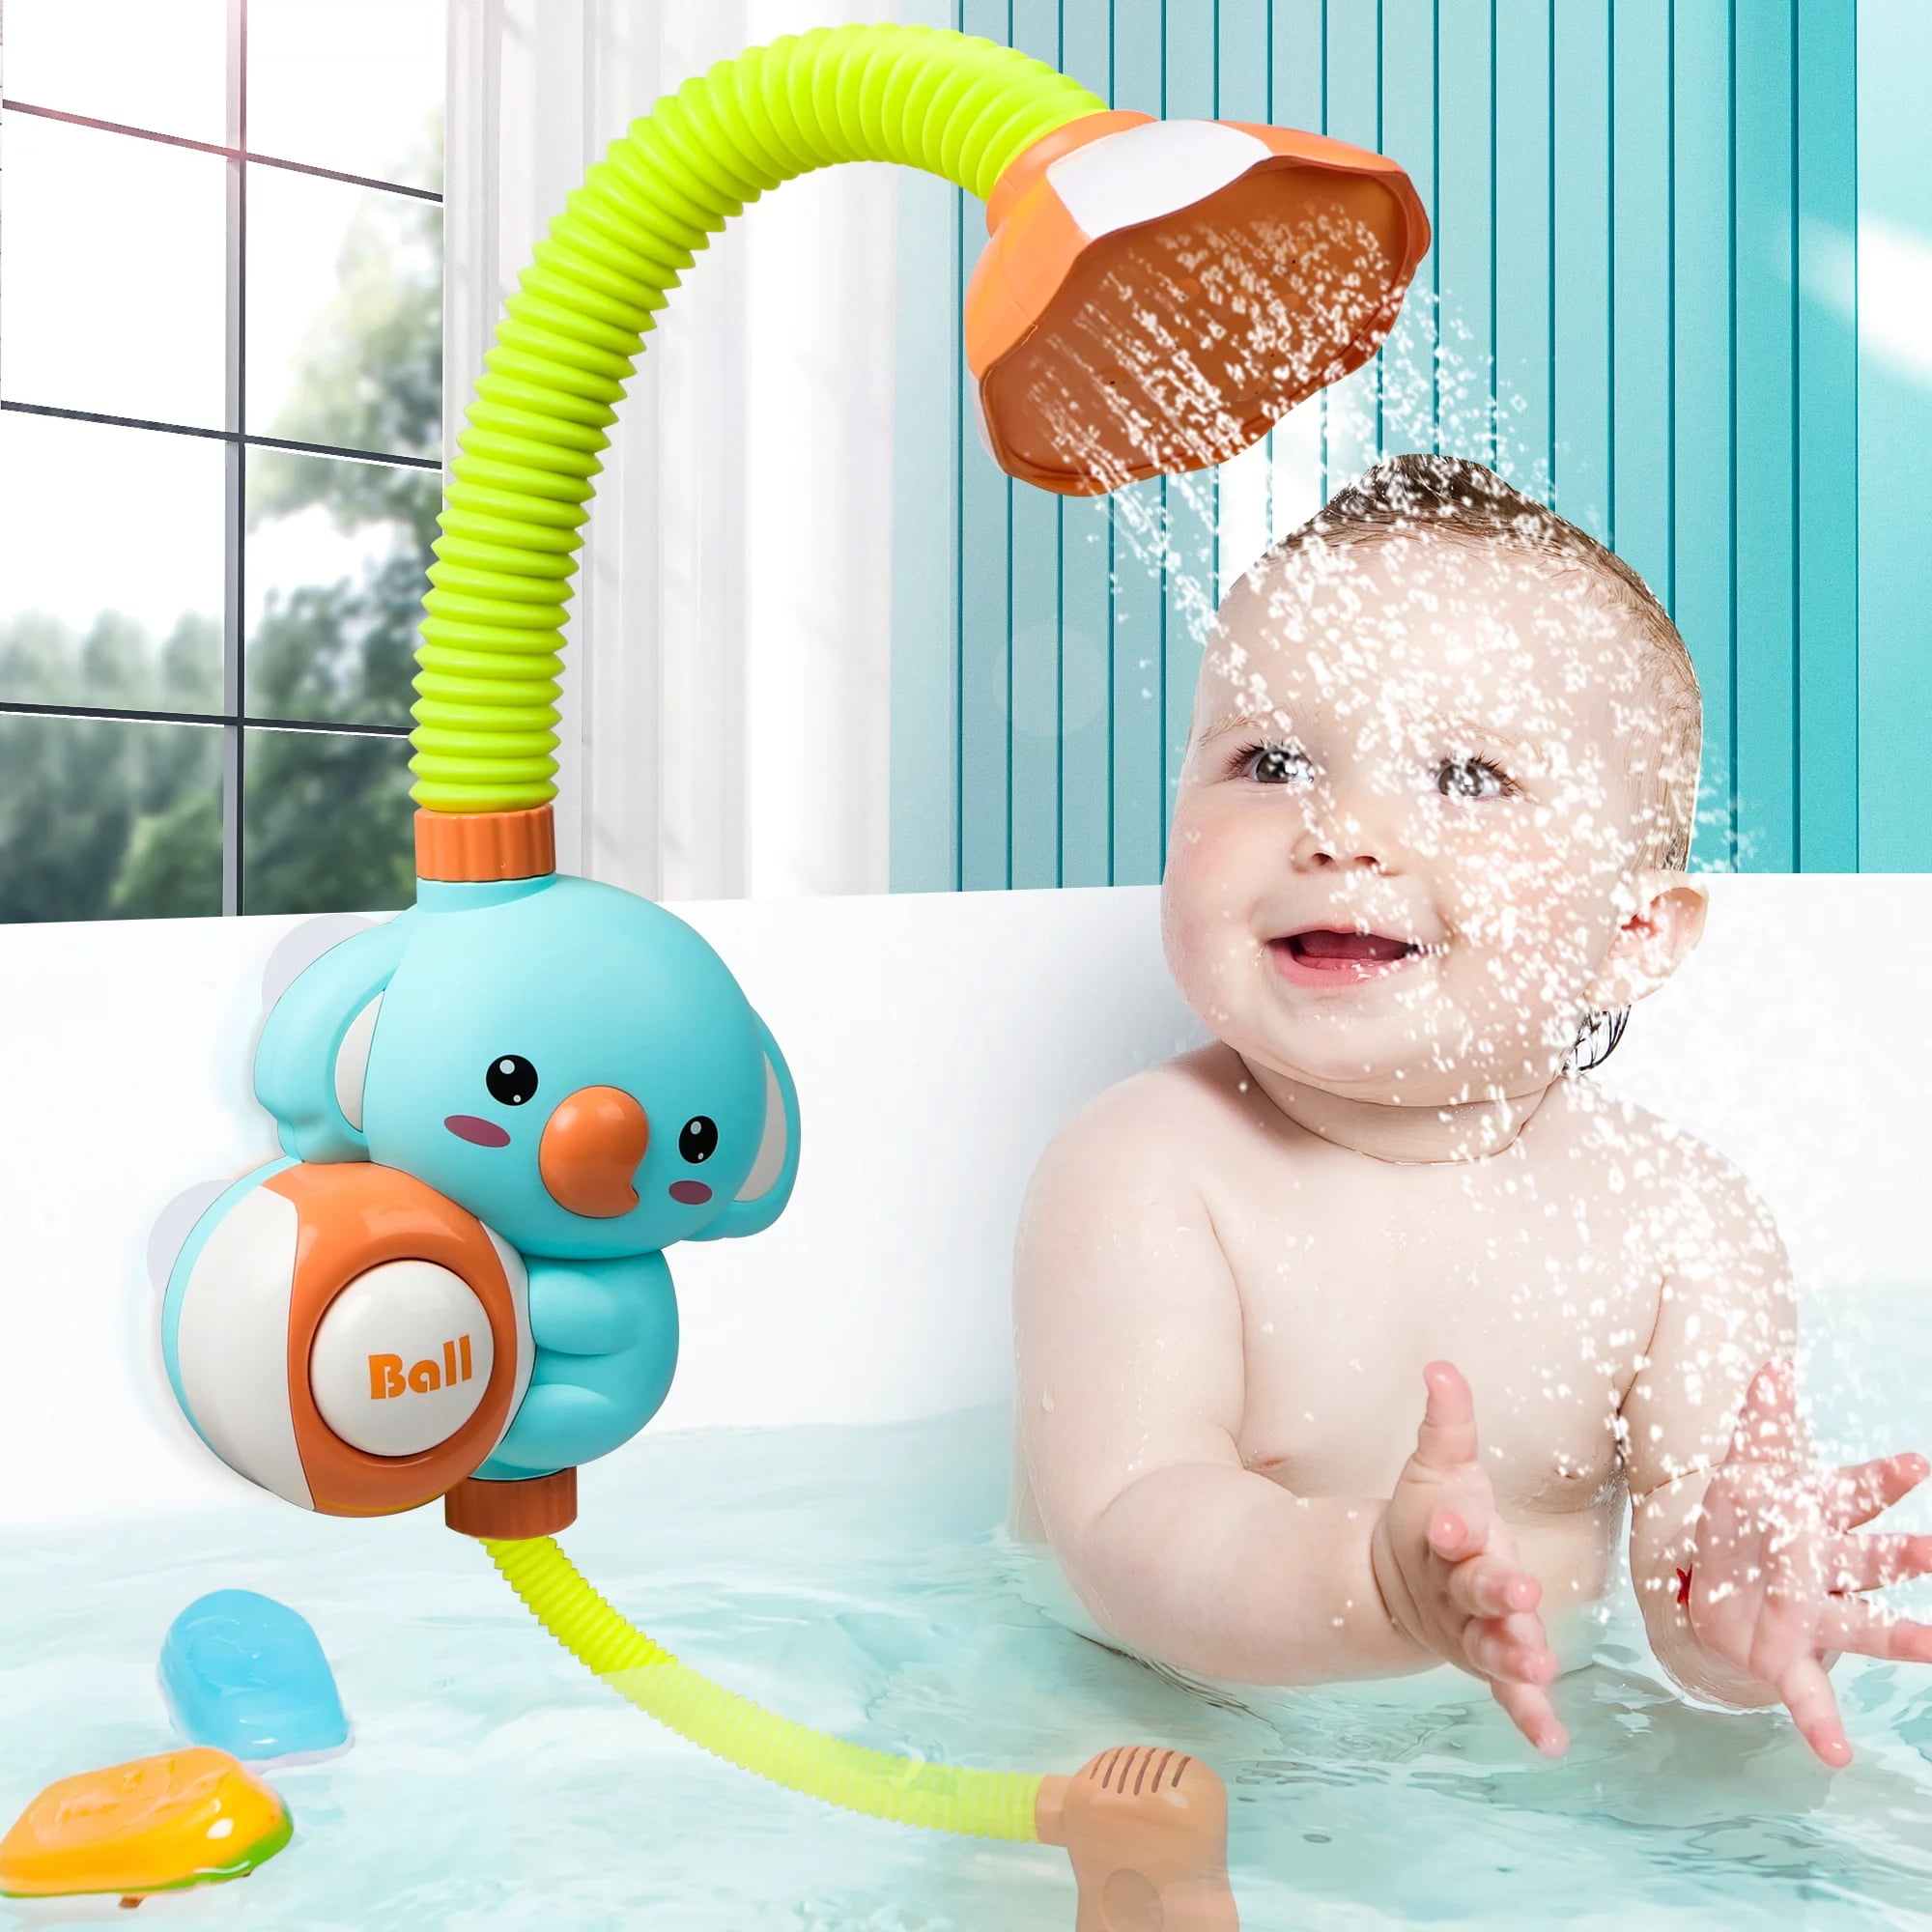 12 Fun Bathtime Games for Babies & Toddlers